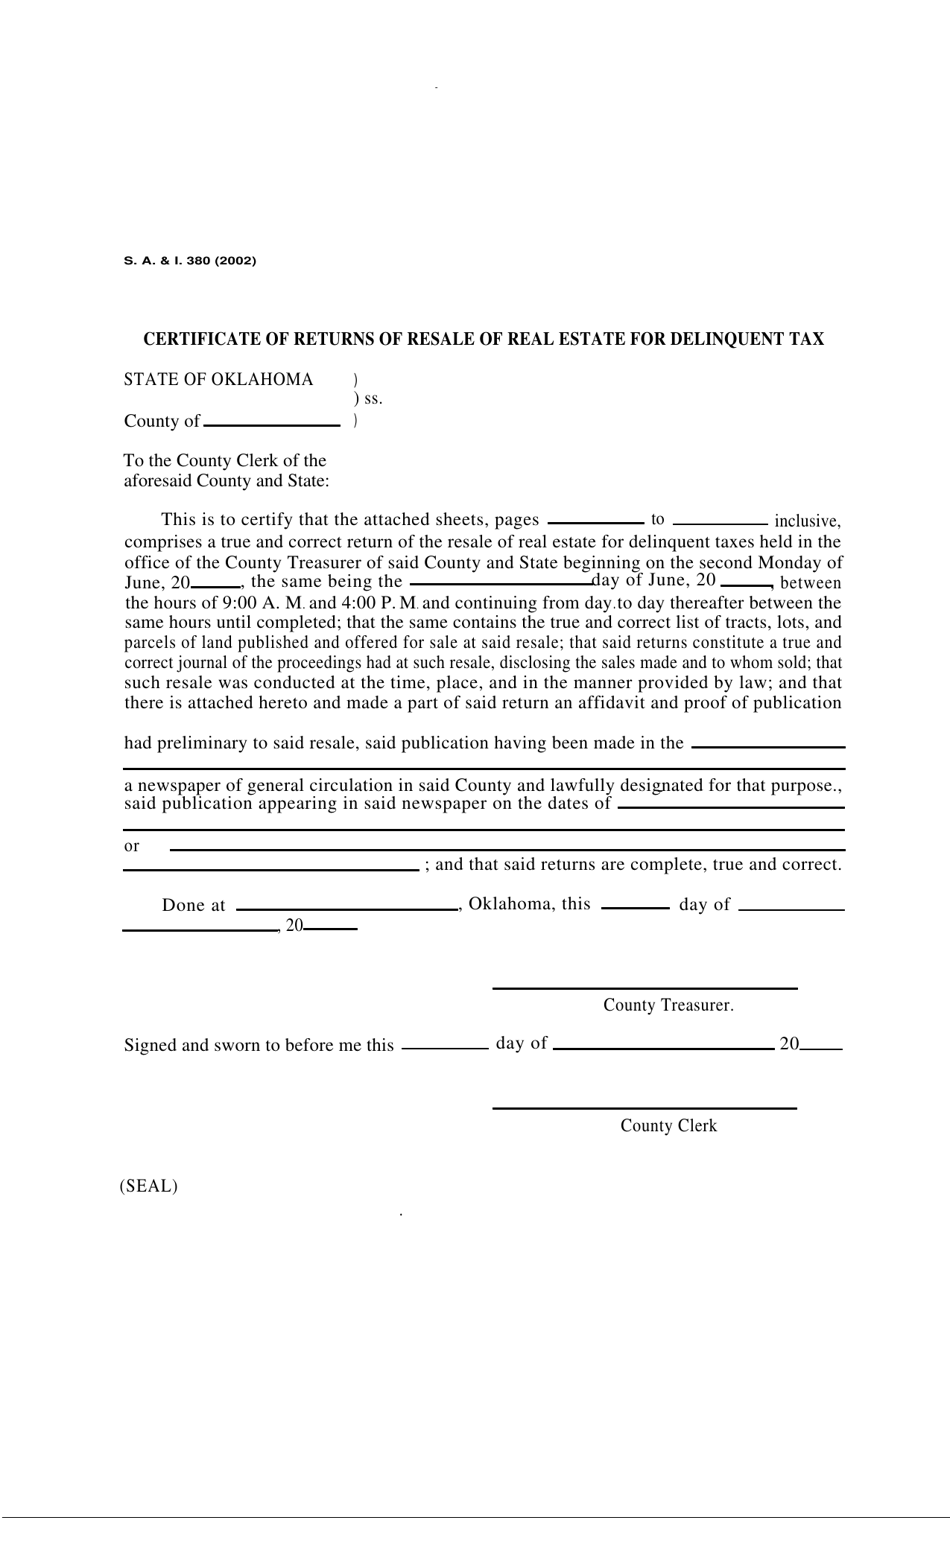 Form S.A. I.380 Certificate of Returns of Resale of Real Estate for Delinquent Tax - Oklahoma, Page 1